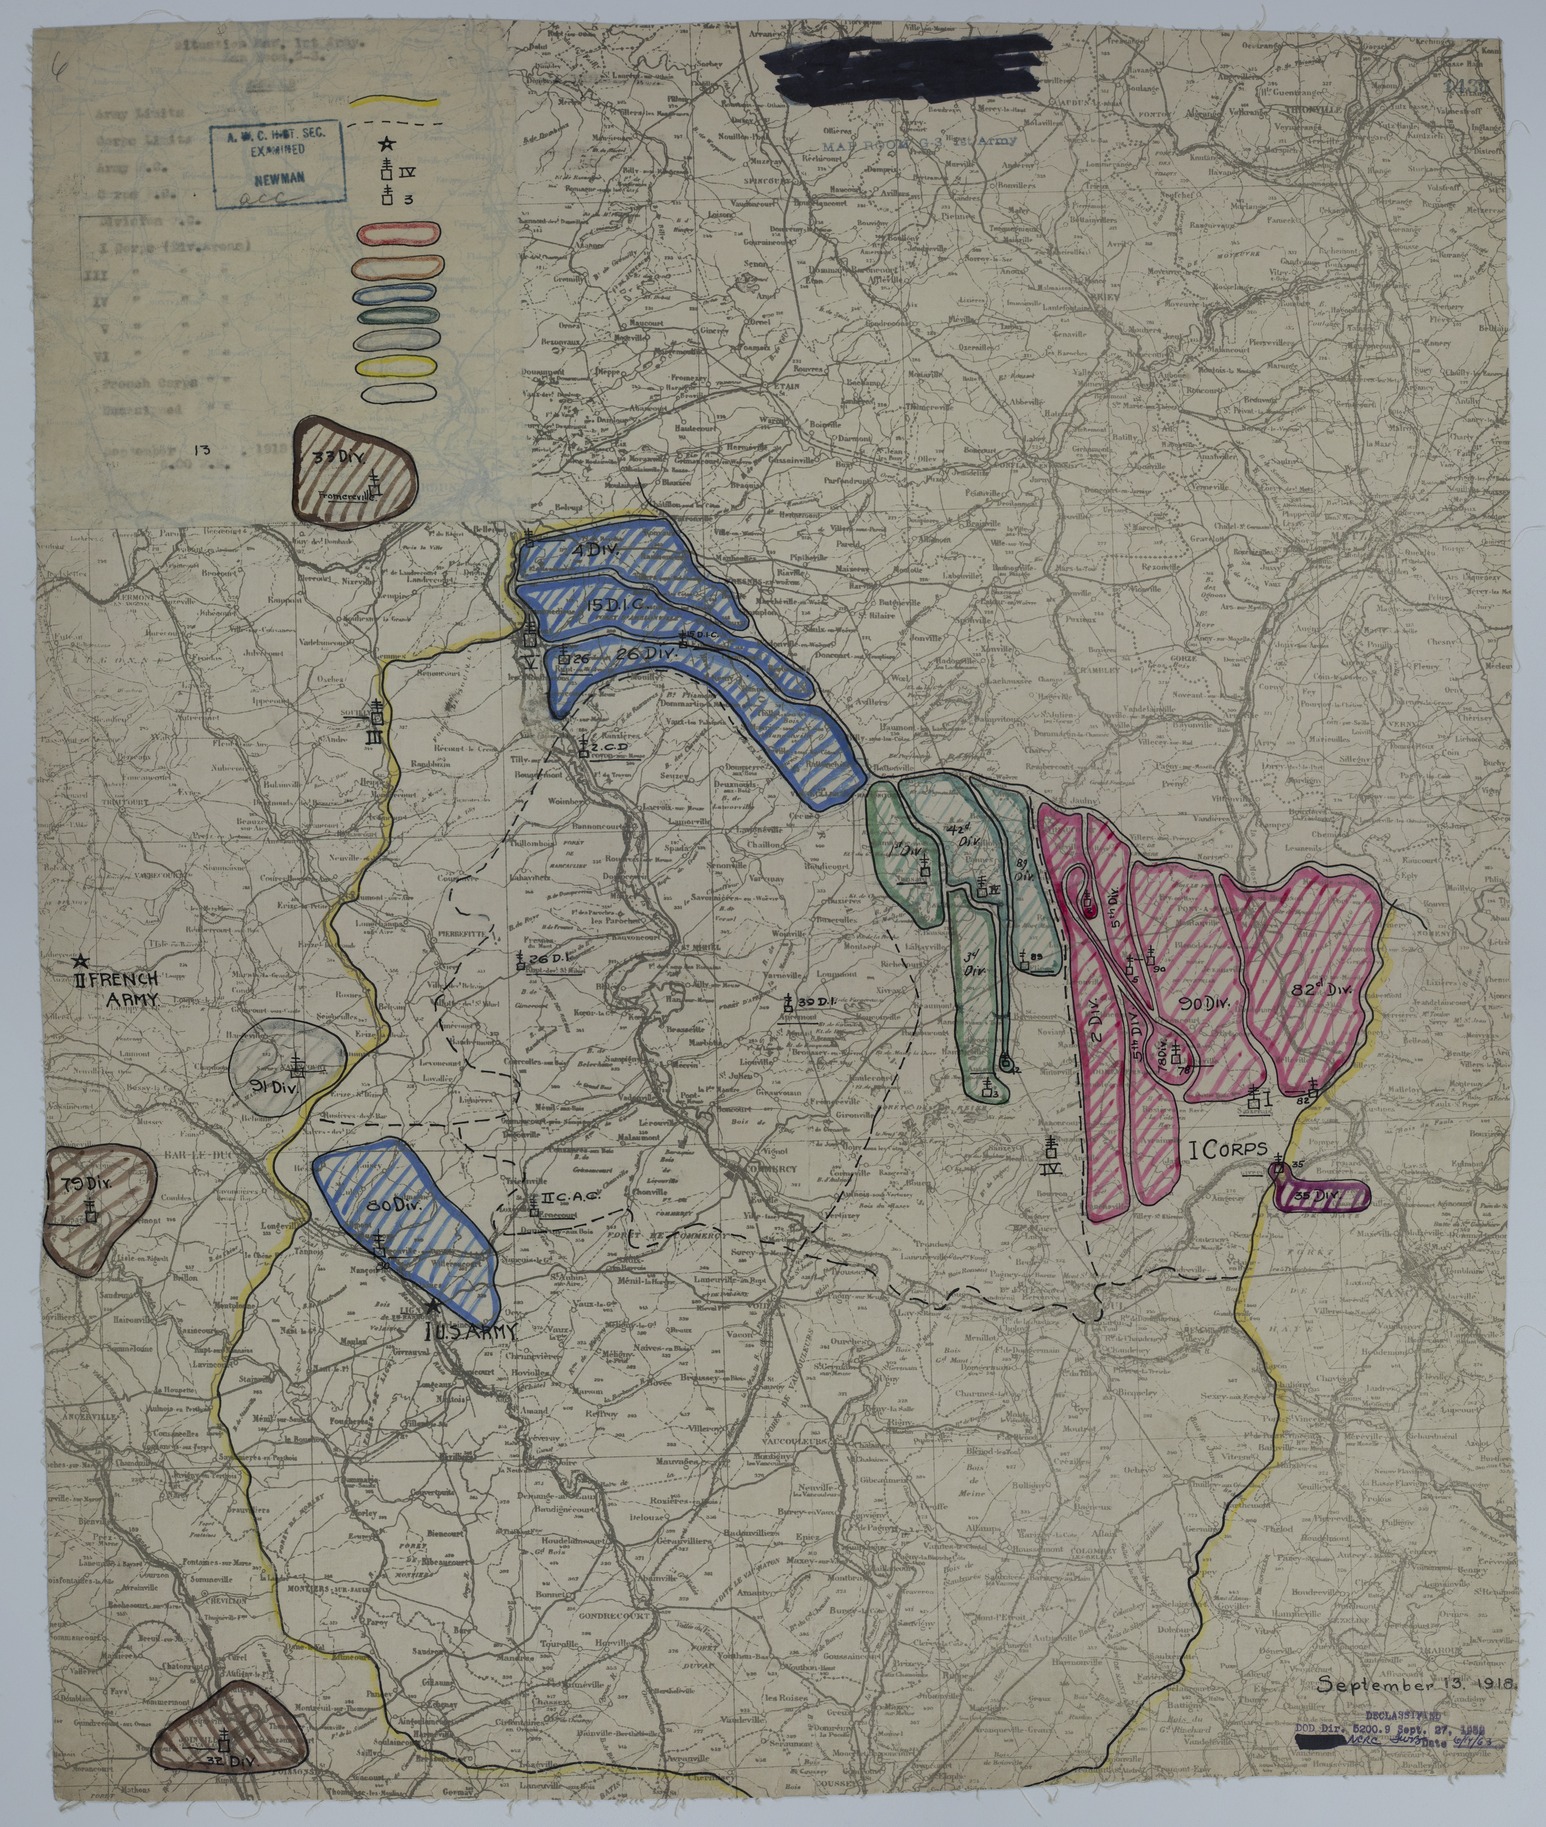 Map of Divisional Positions on September 13, 1918